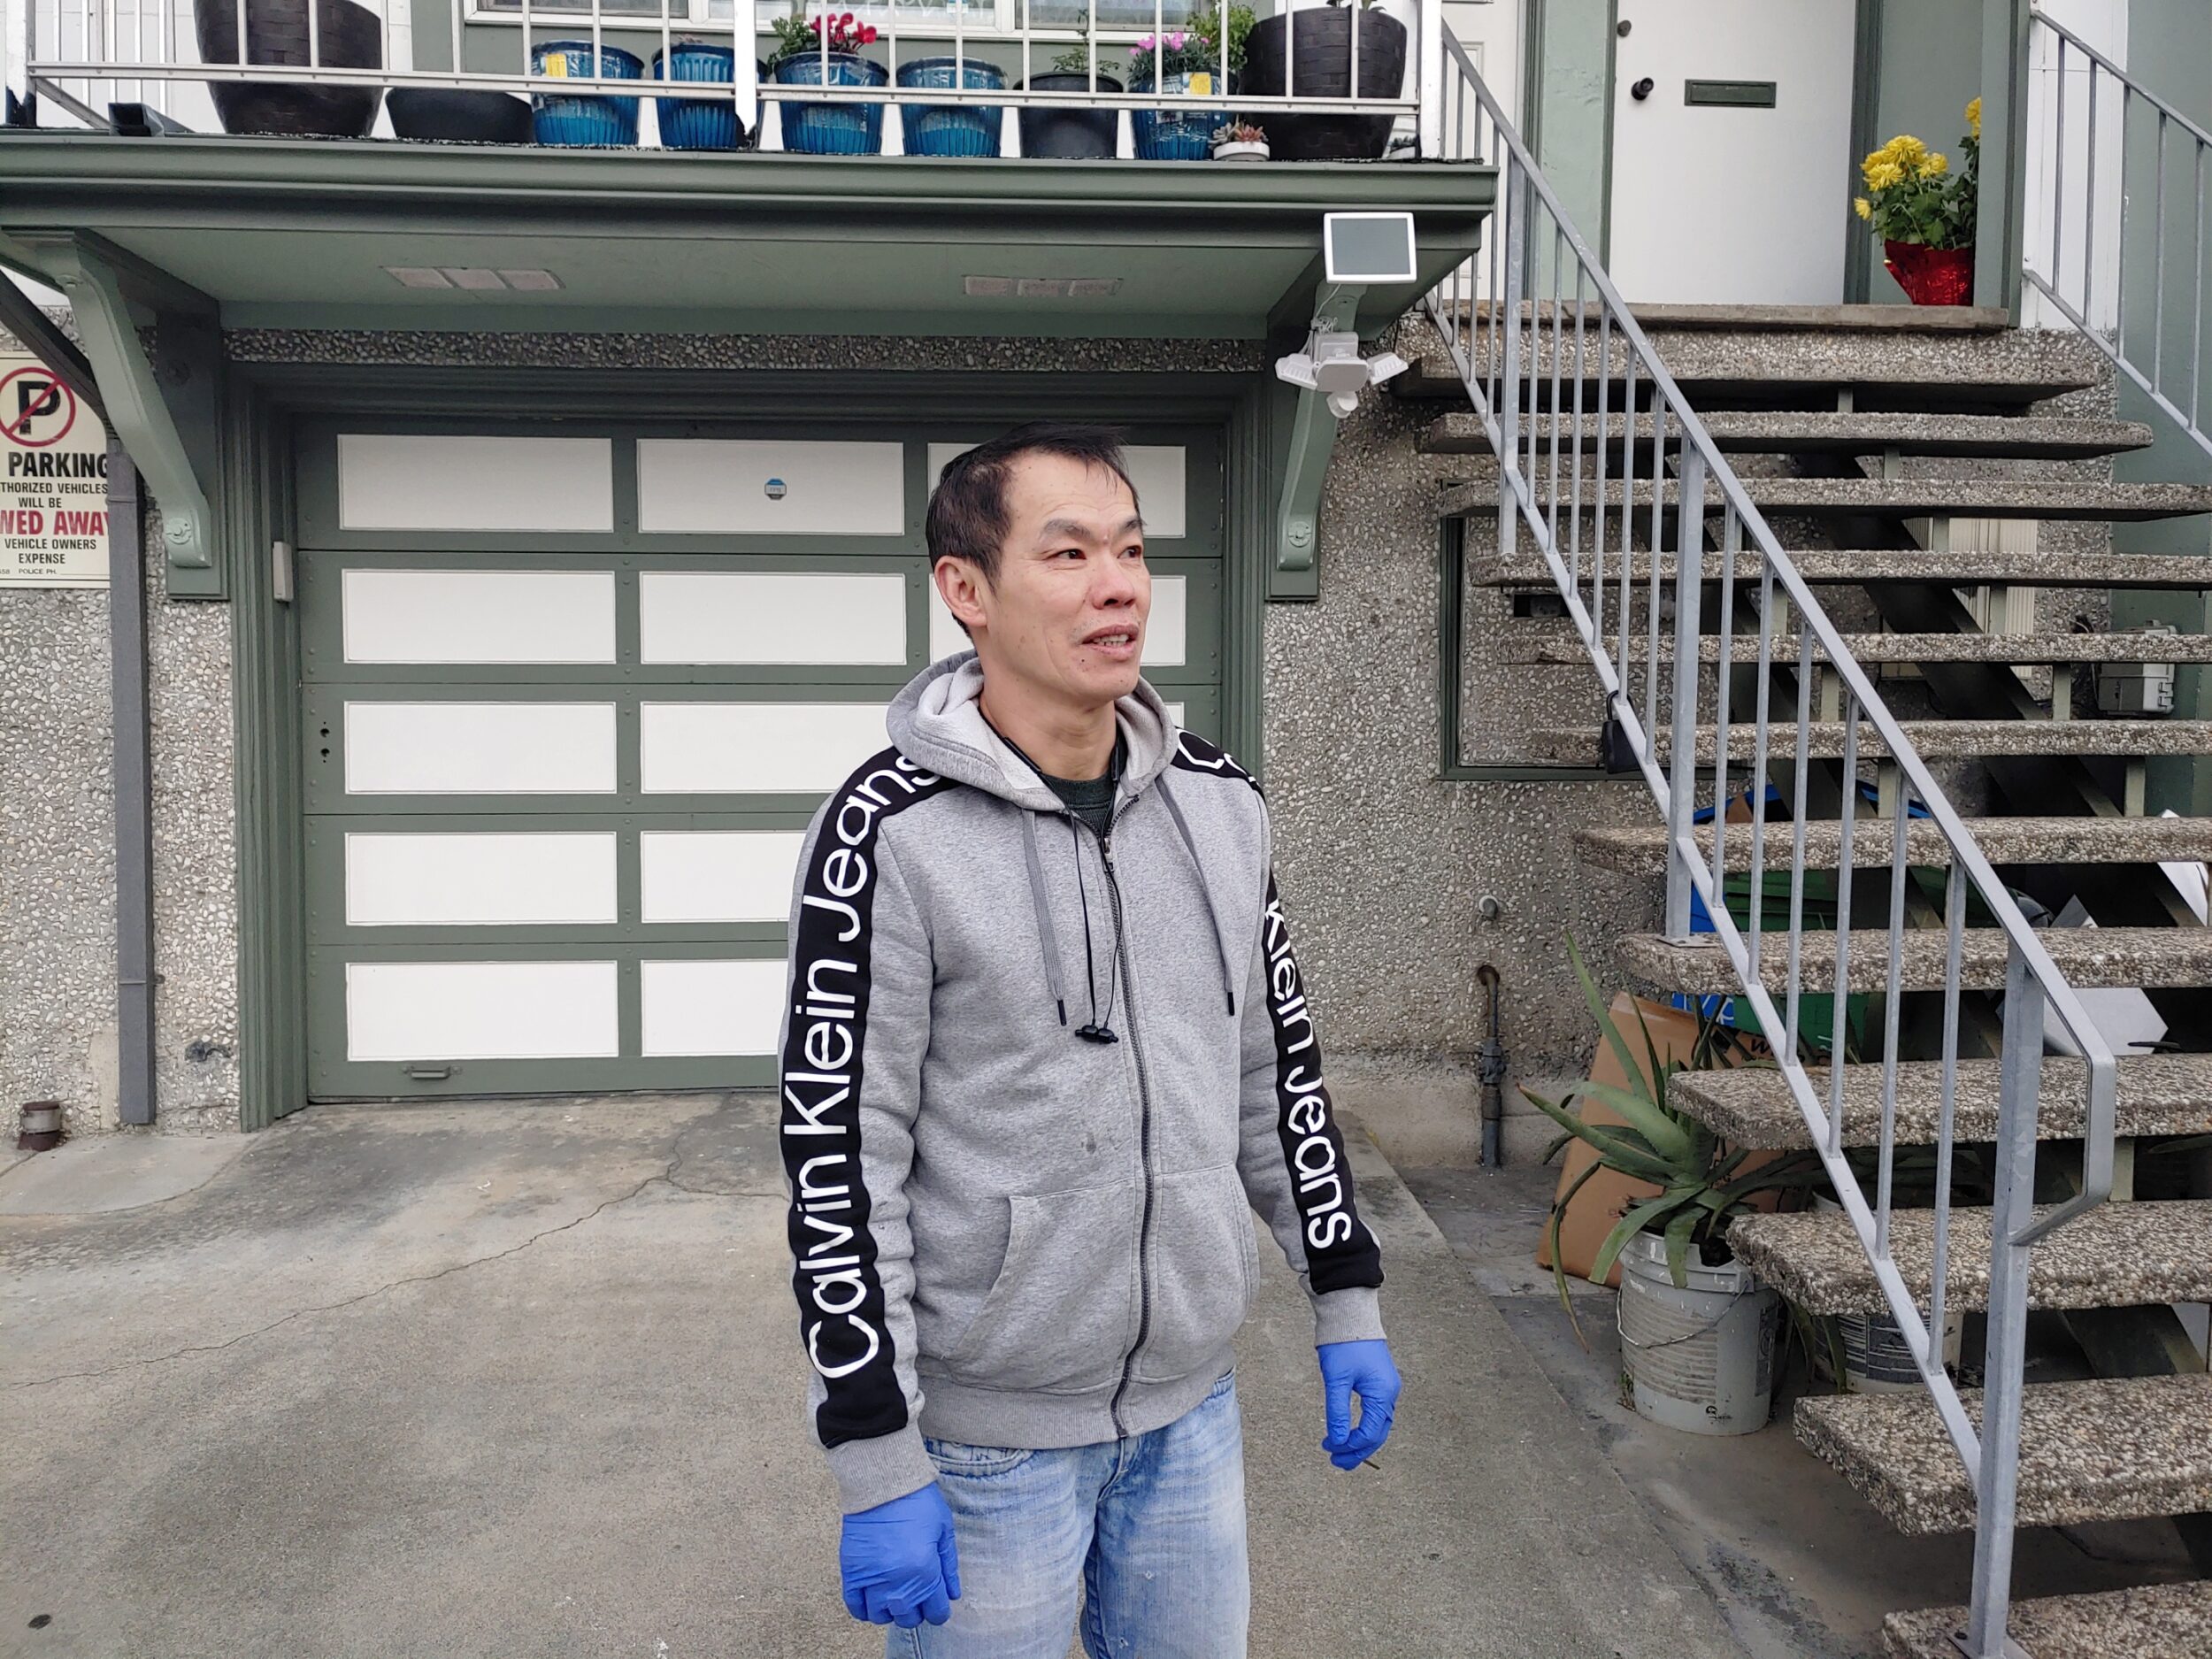 An Asian man in a Calvin Klein hoodie, jeans and blue nitrile gloves stands on a driveway in front of a green and white garage door.